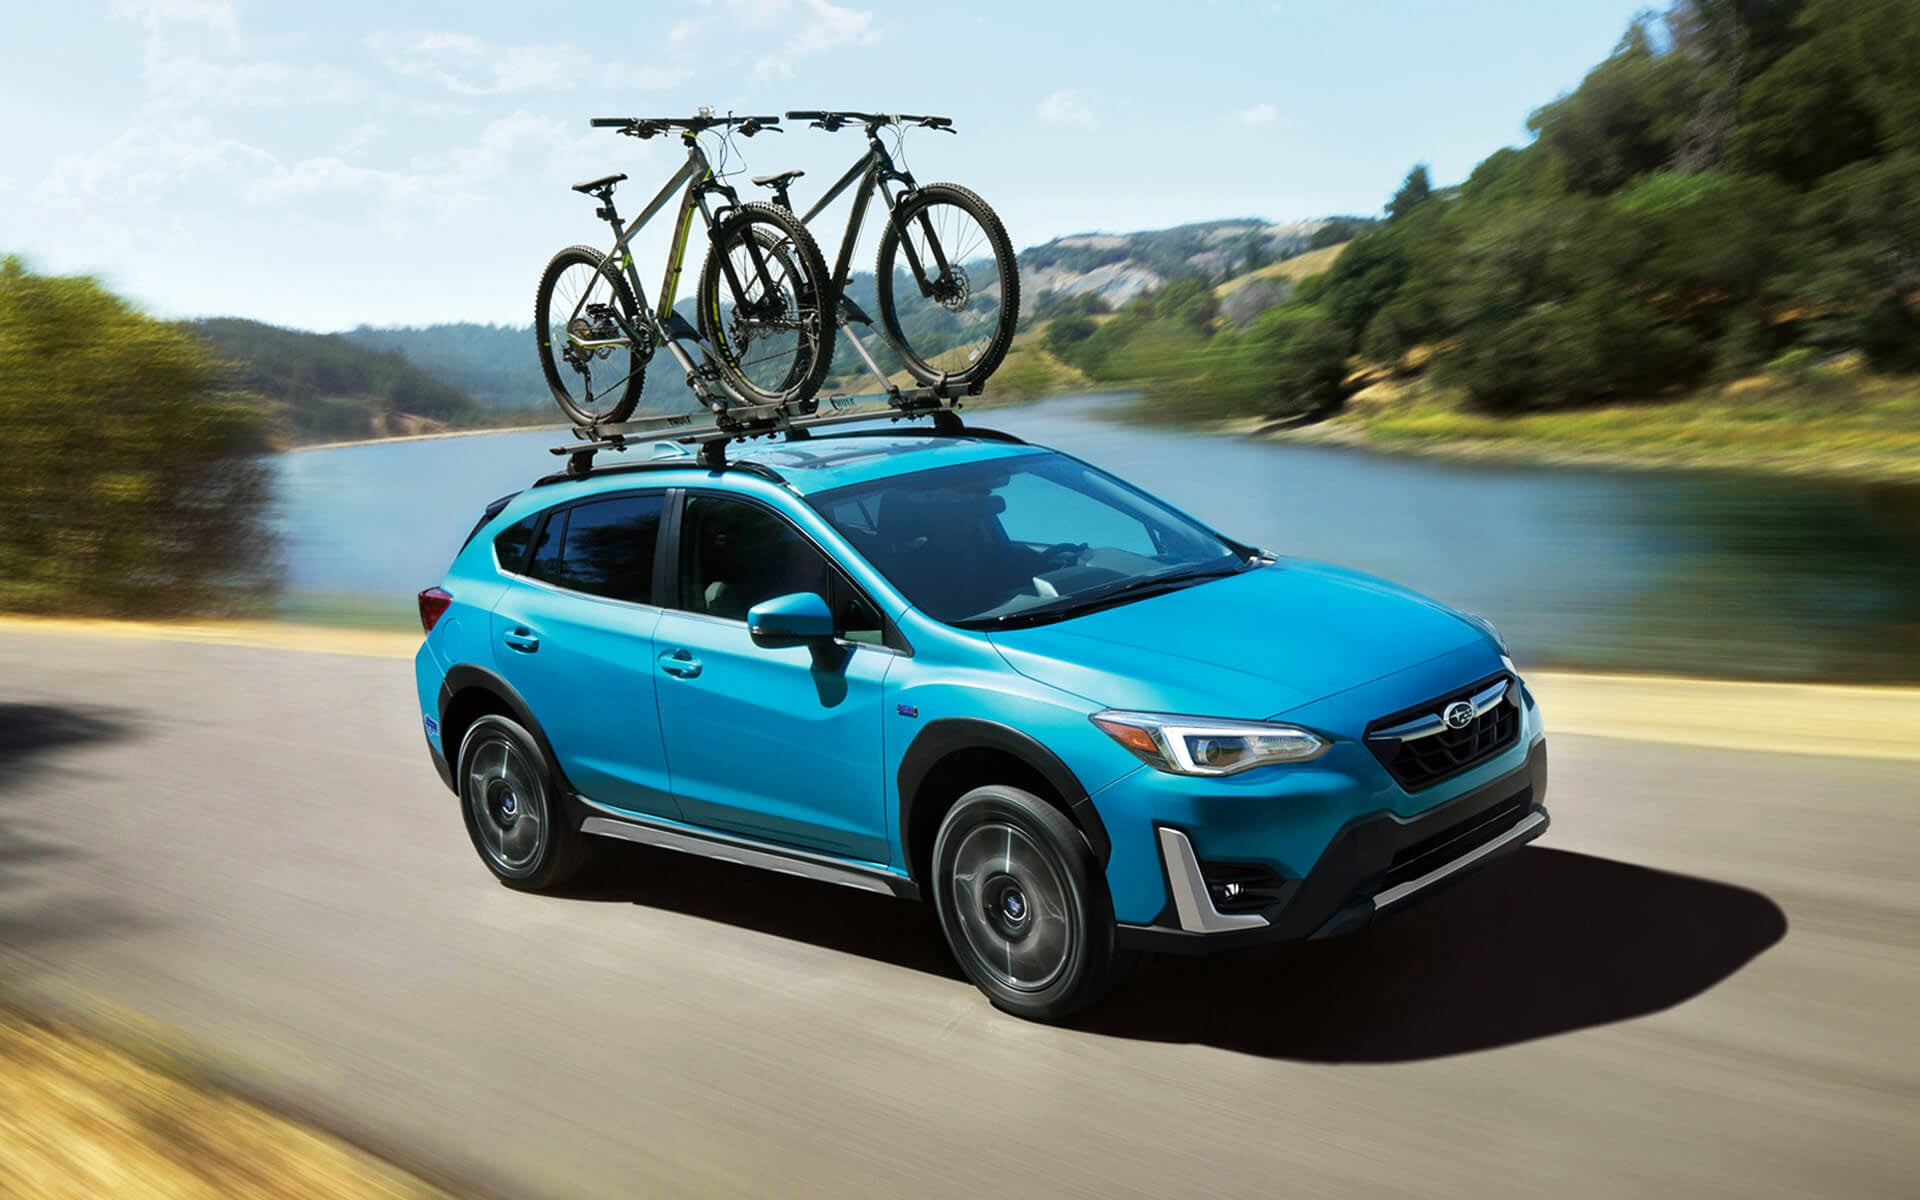 A blue Crosstrek Hybrid with two bicycles on its roof rack driving beside a river | Five Star Subaru in Grapevine TX